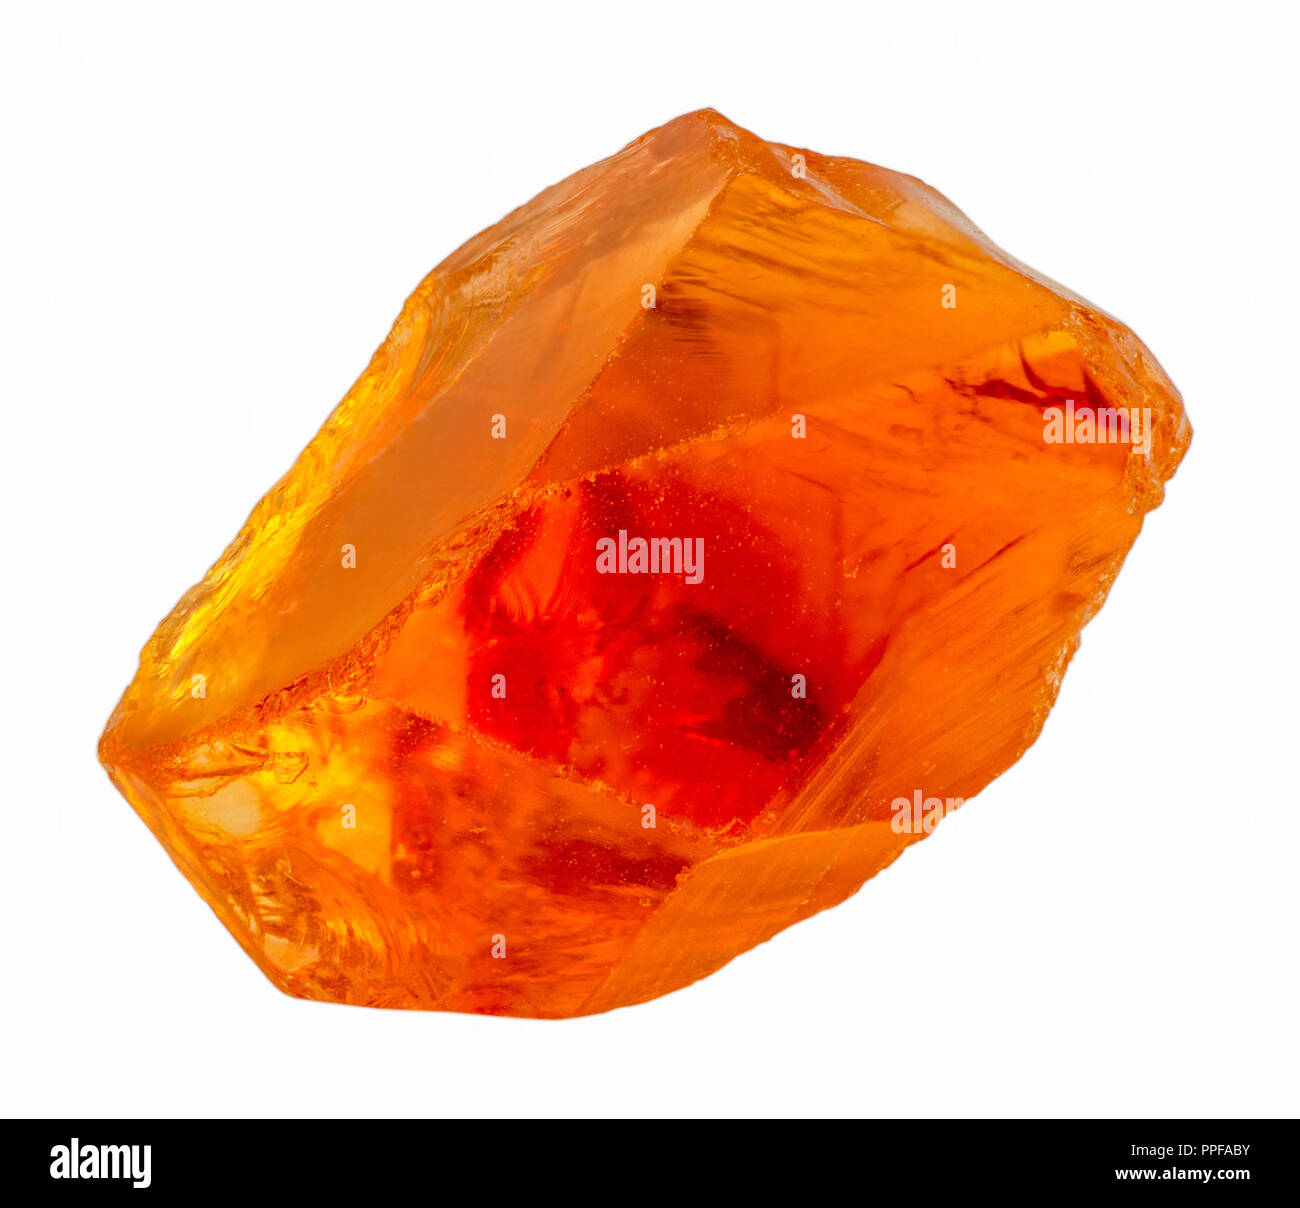 Rough Clear Transparent Citrine Crystal Good Saturated Yellow Orange Color High Qualiy Citrine For Gem Cutting Purpose Isolated On White Background Stock Photo Alamy